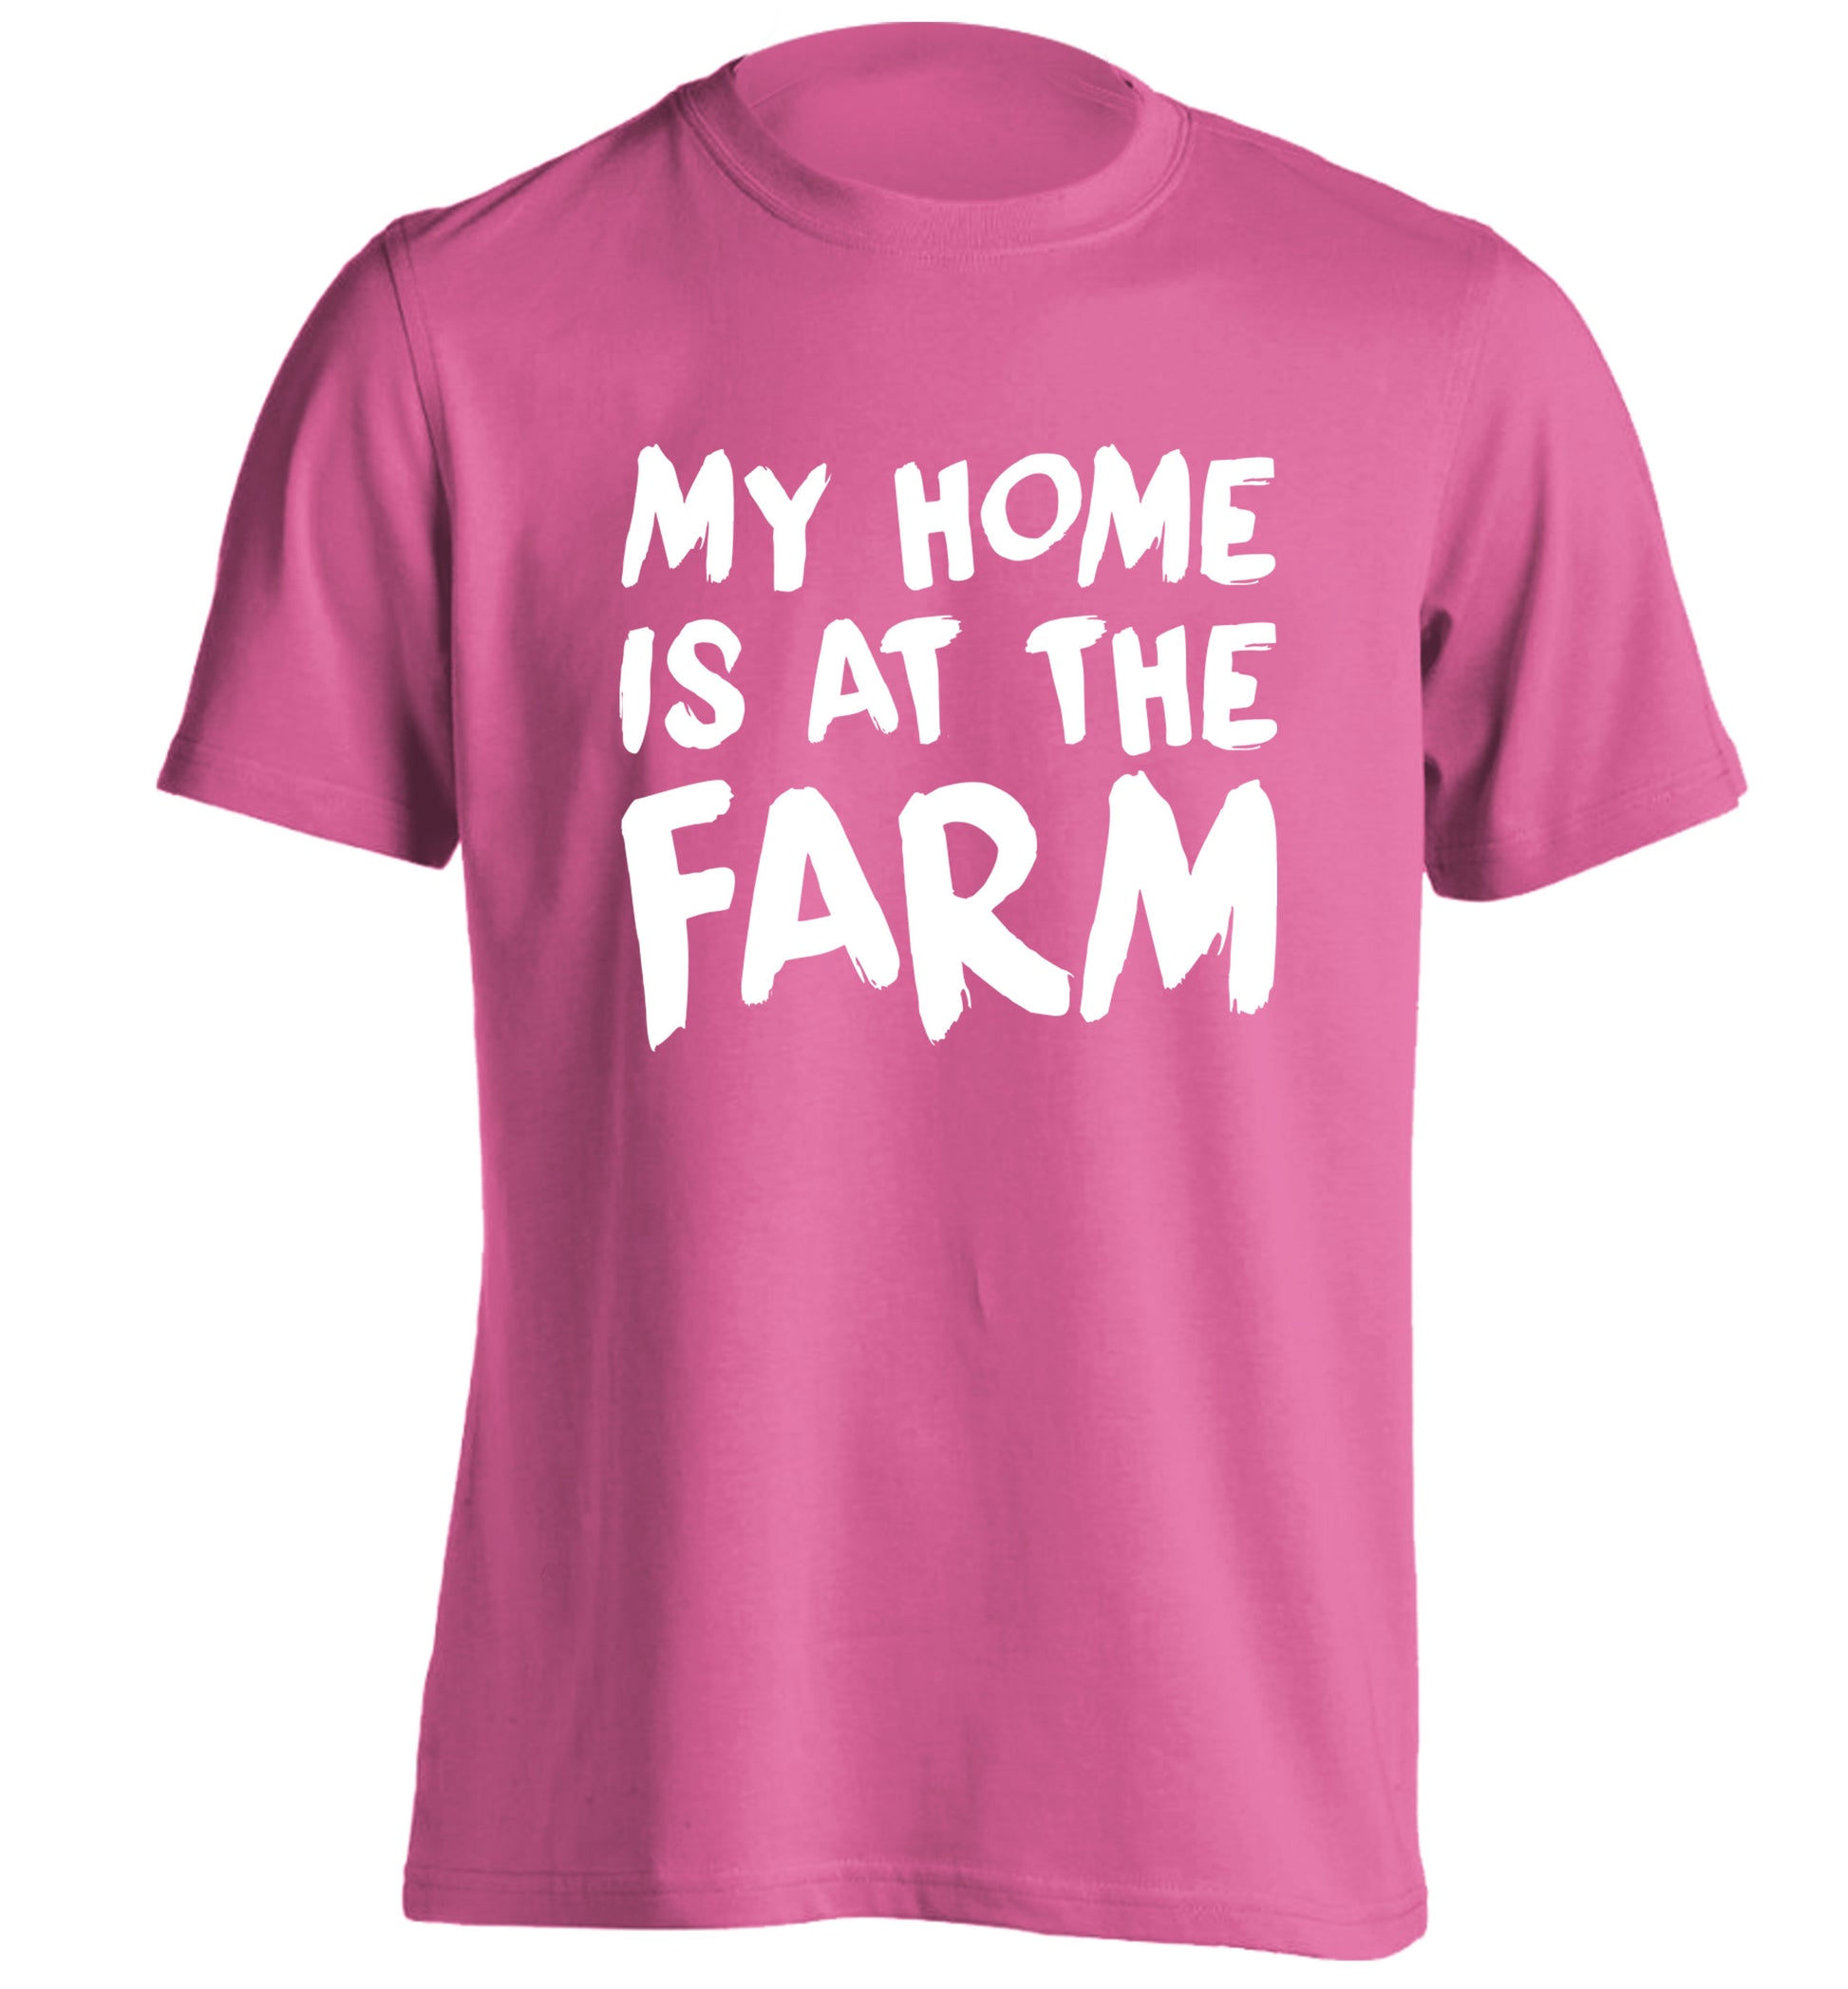 My home is at the farm adults unisex pink Tshirt 2XL